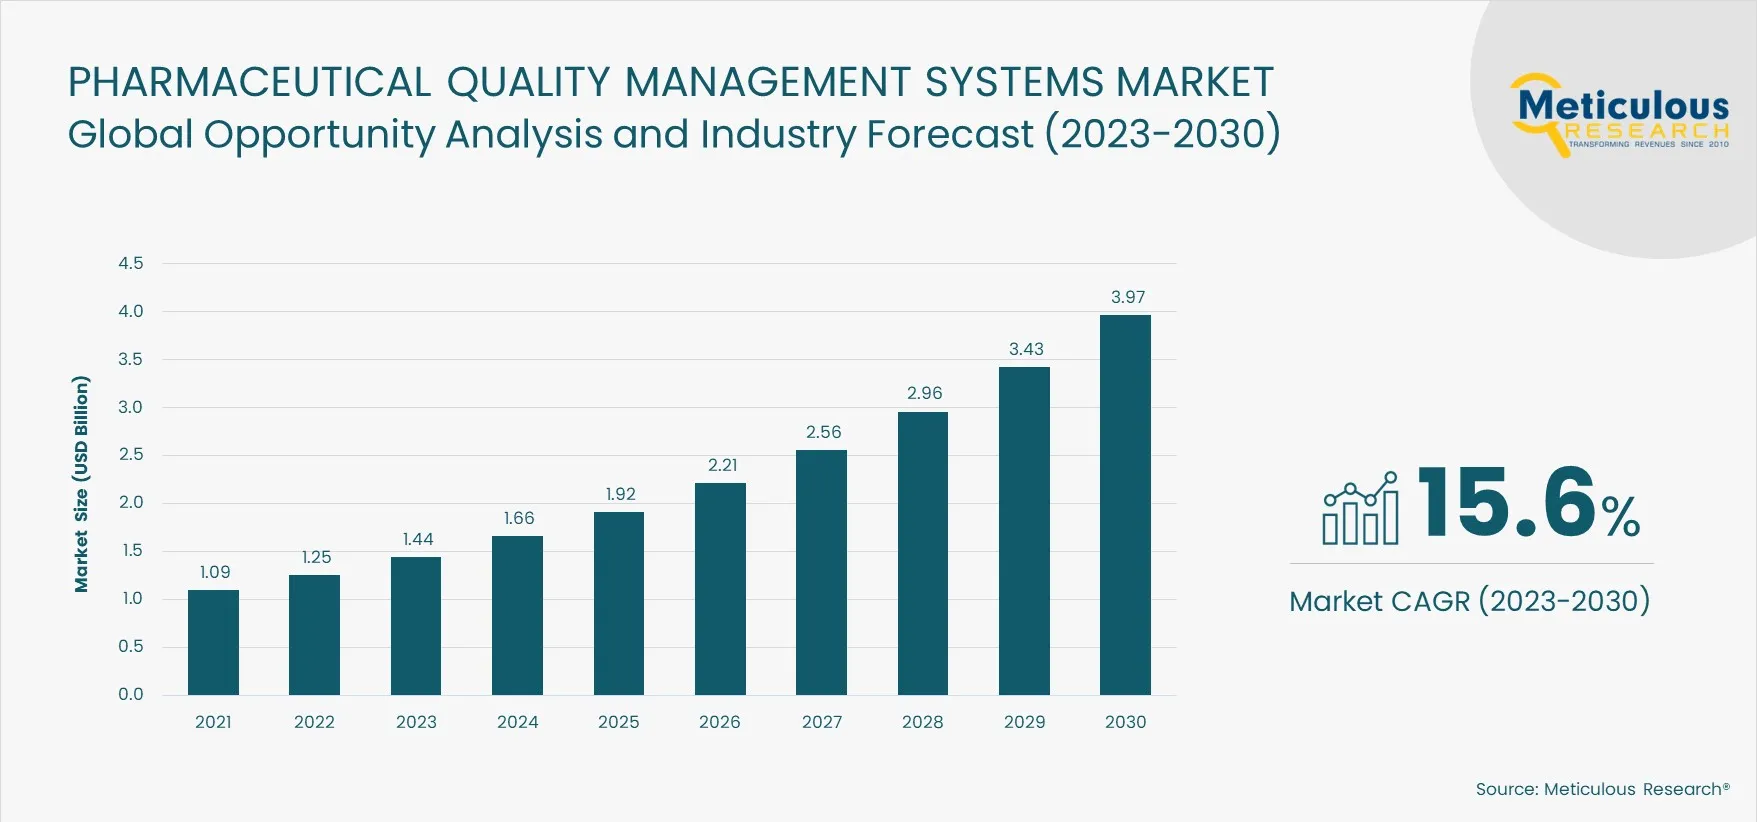 Pharmaceutical Quality Management Systems Market Bar Chart